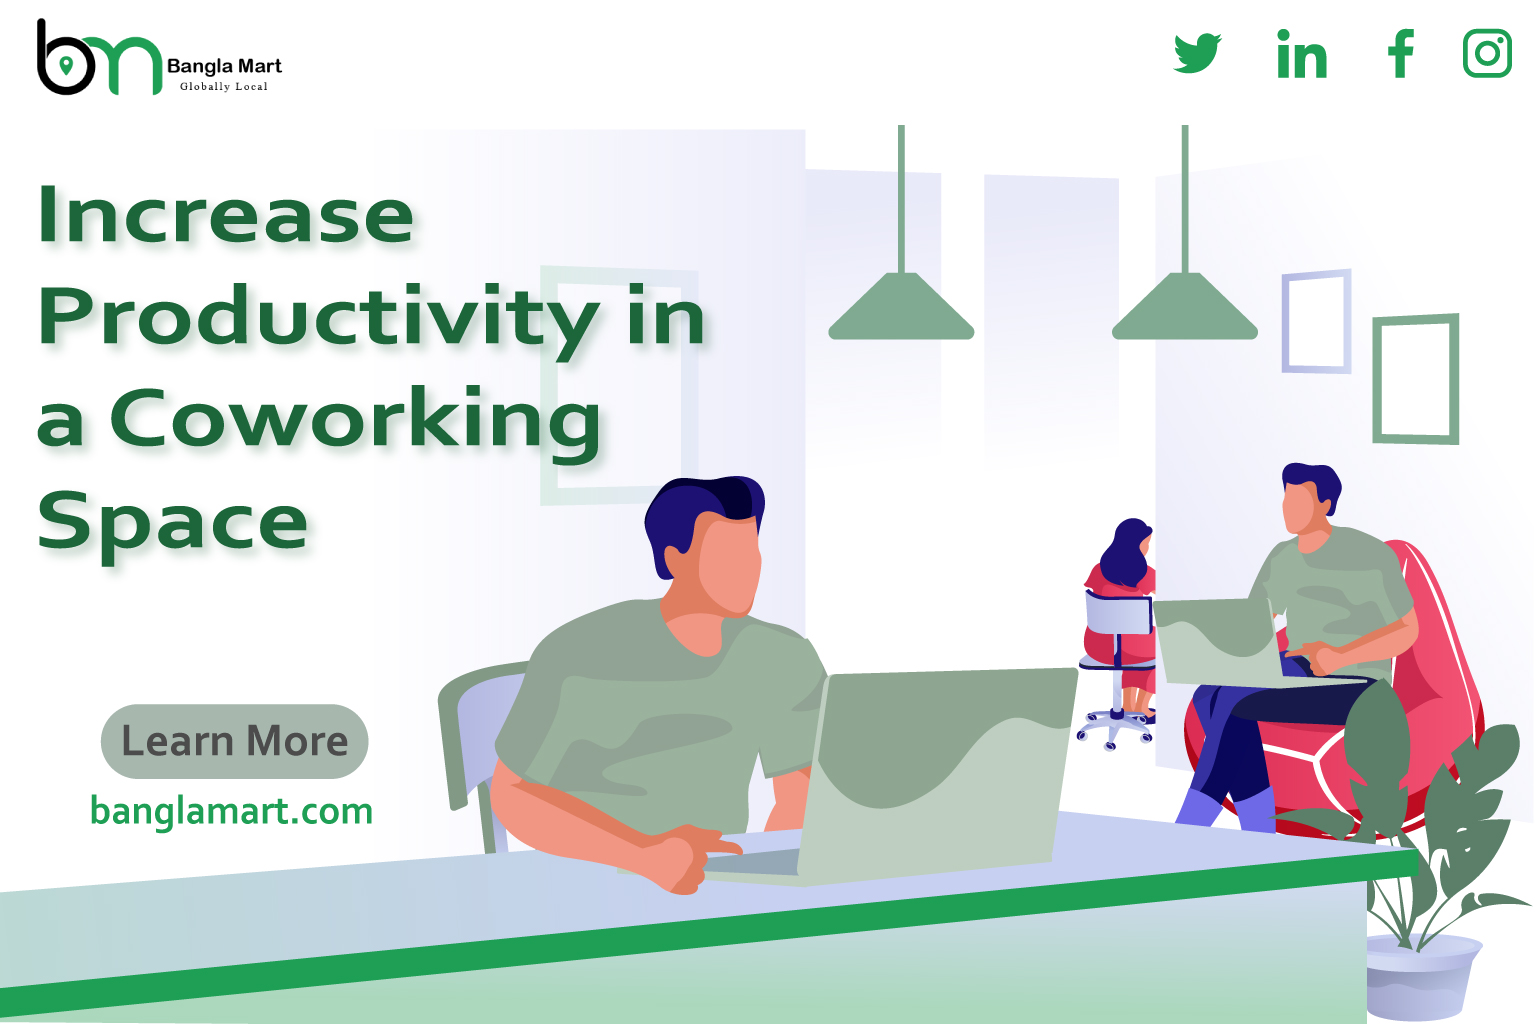 Increase Productivity in a Coworking Space